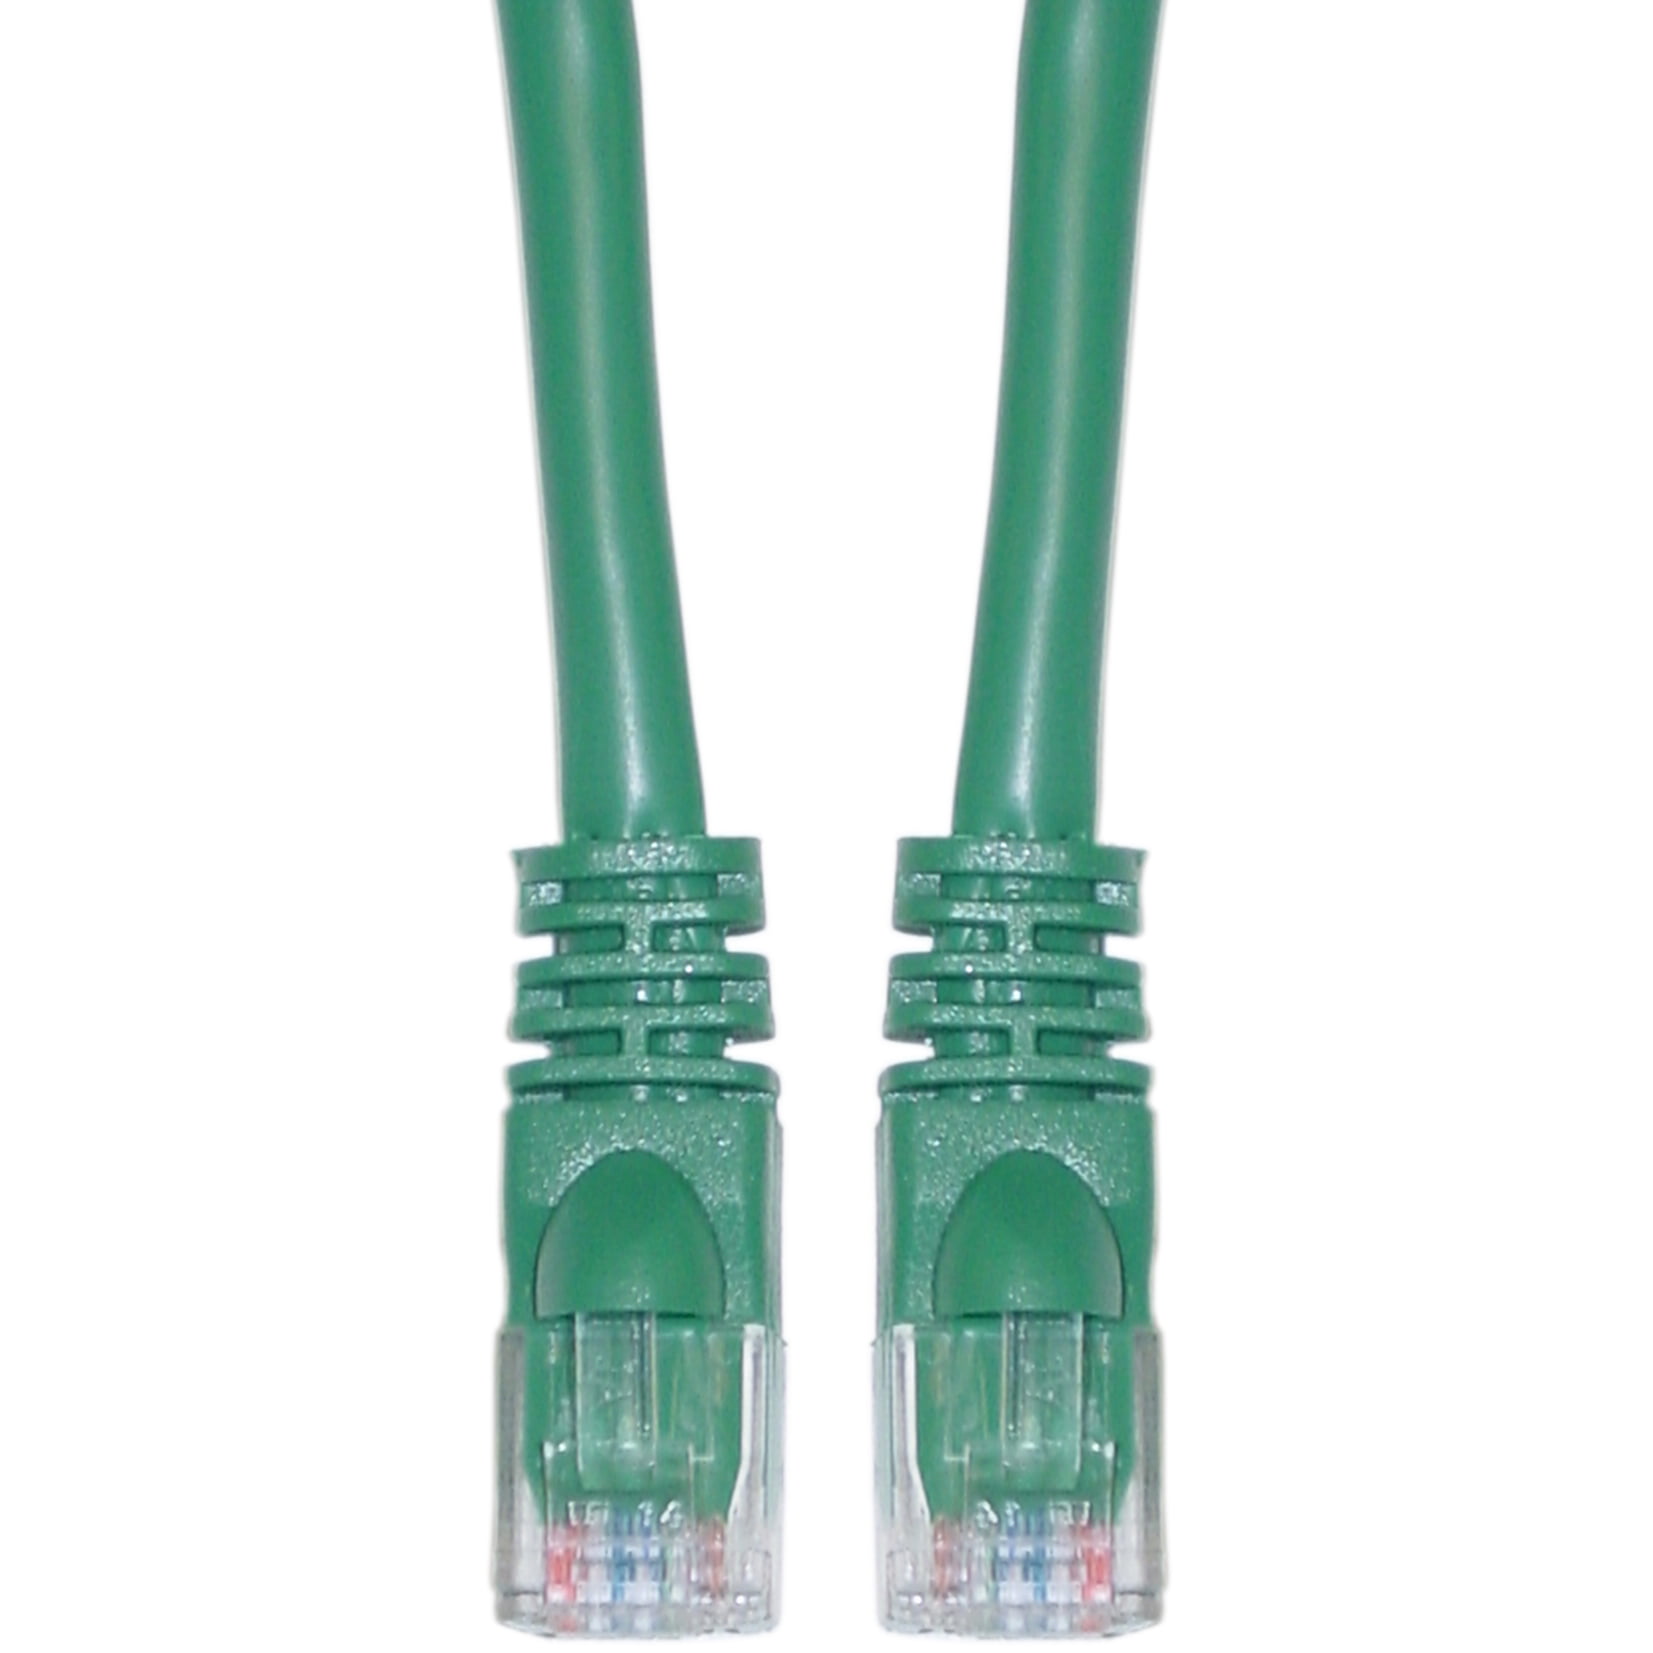 Bootless Cat6 Purple Ethernet Patch Cable 3 Foot 